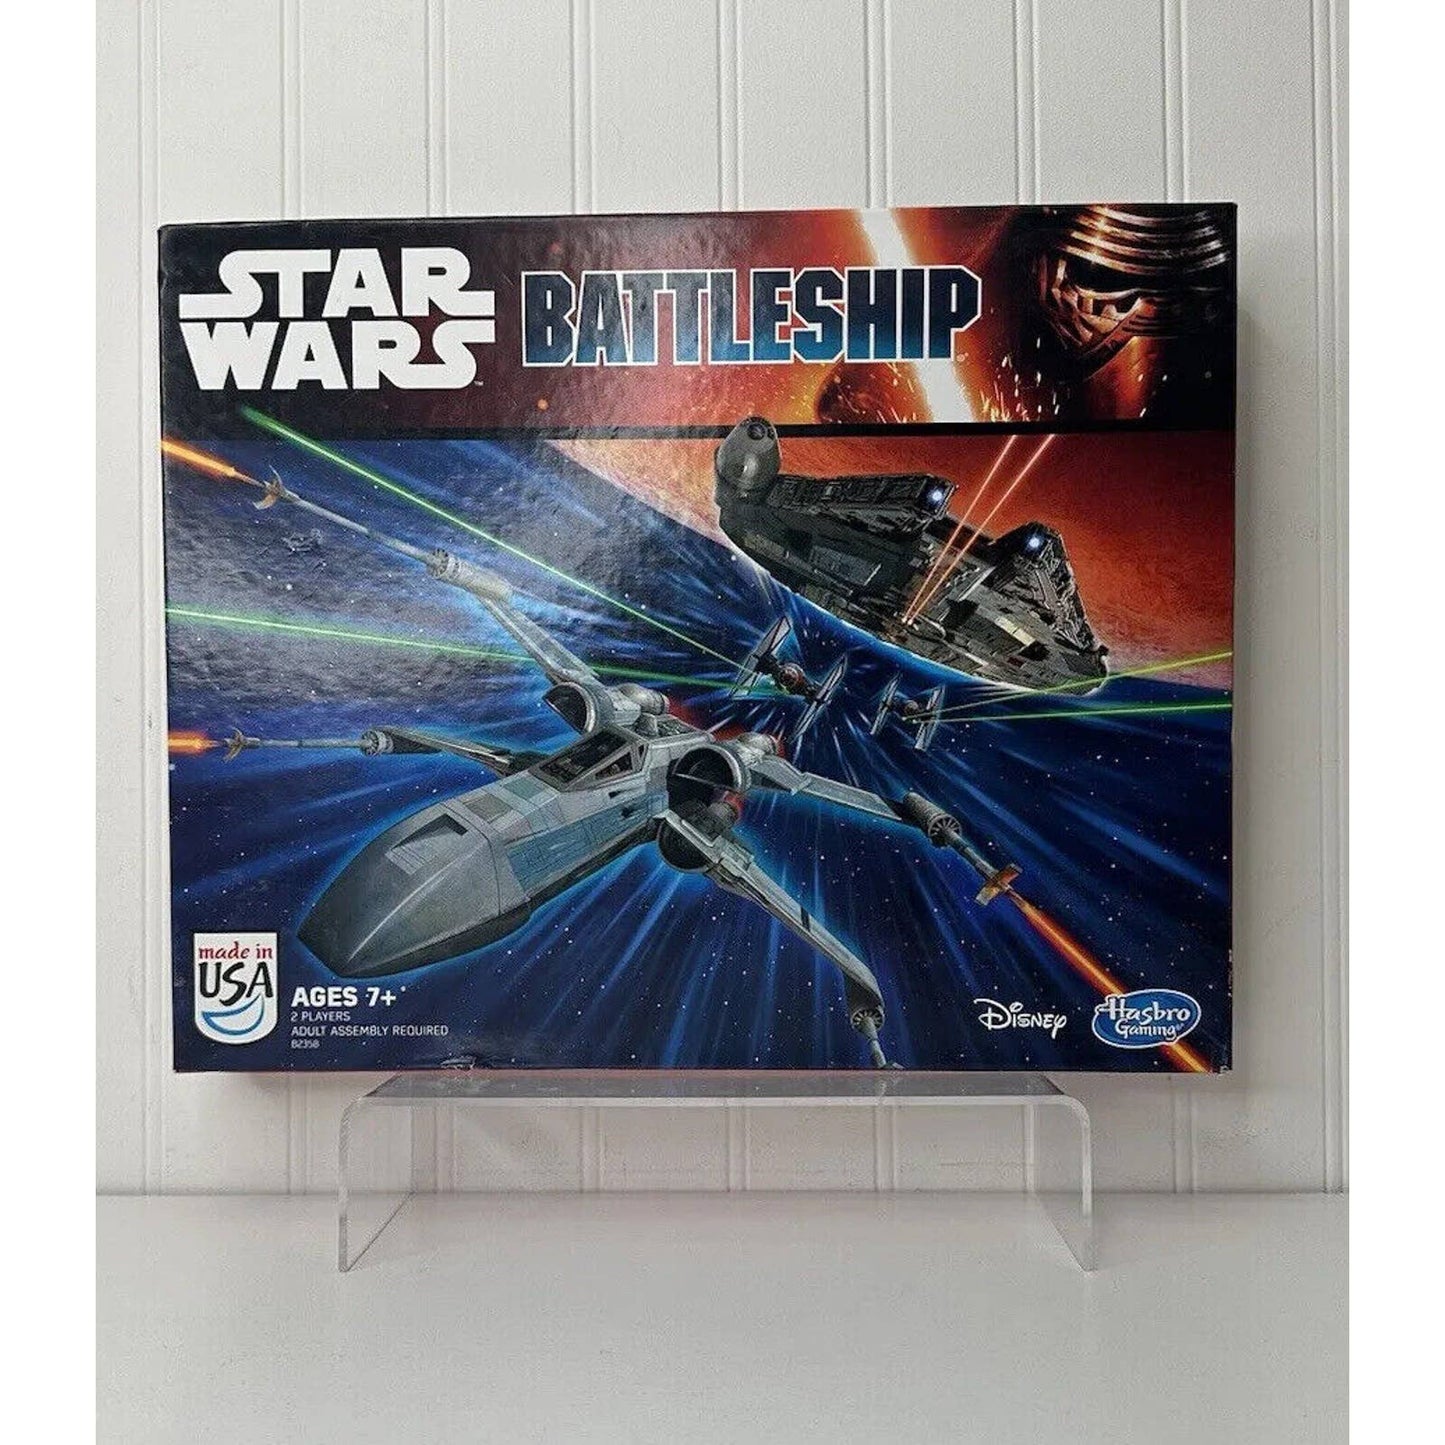 Star Wars Battleship Board Game Disney Hasbro -Complete With Instructions